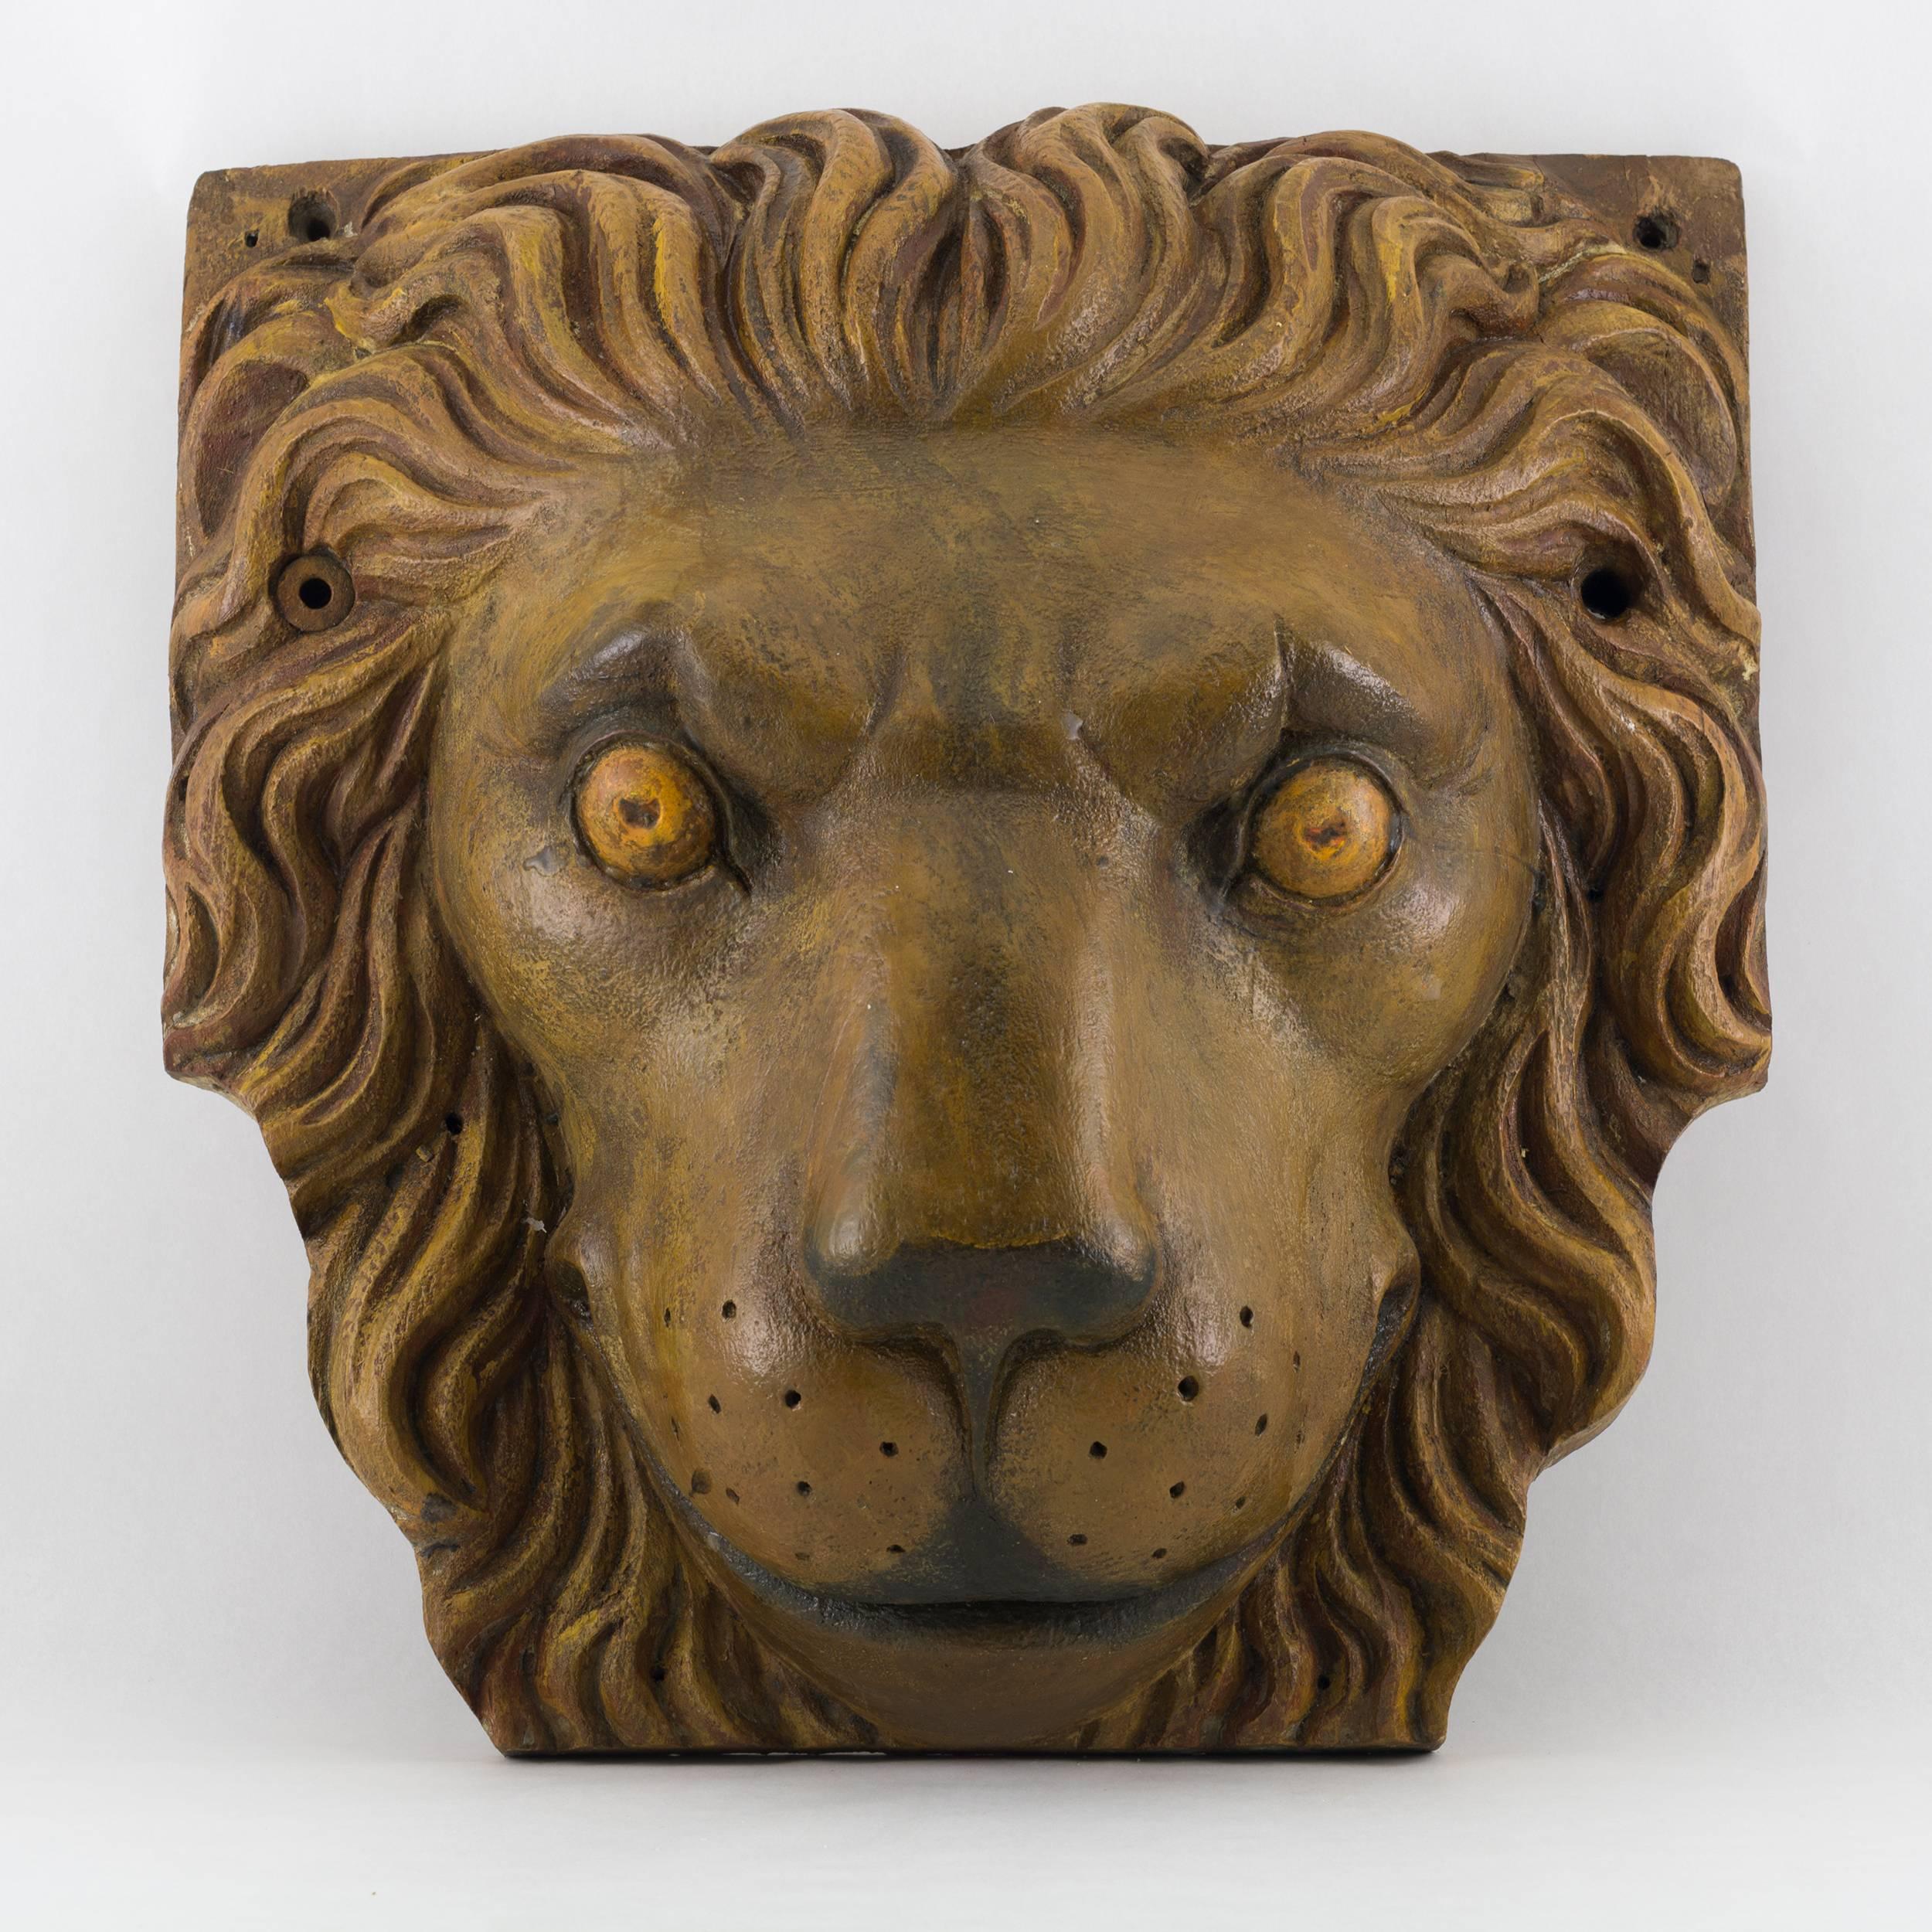 Pair of carved and painted ship’s cathead terminals in the form of a lion’s face. A cathead is a large beam located on either bow of a sailing ship and angled outward at about 45 degrees. The beam supports the ship's anchor when raising or lowering